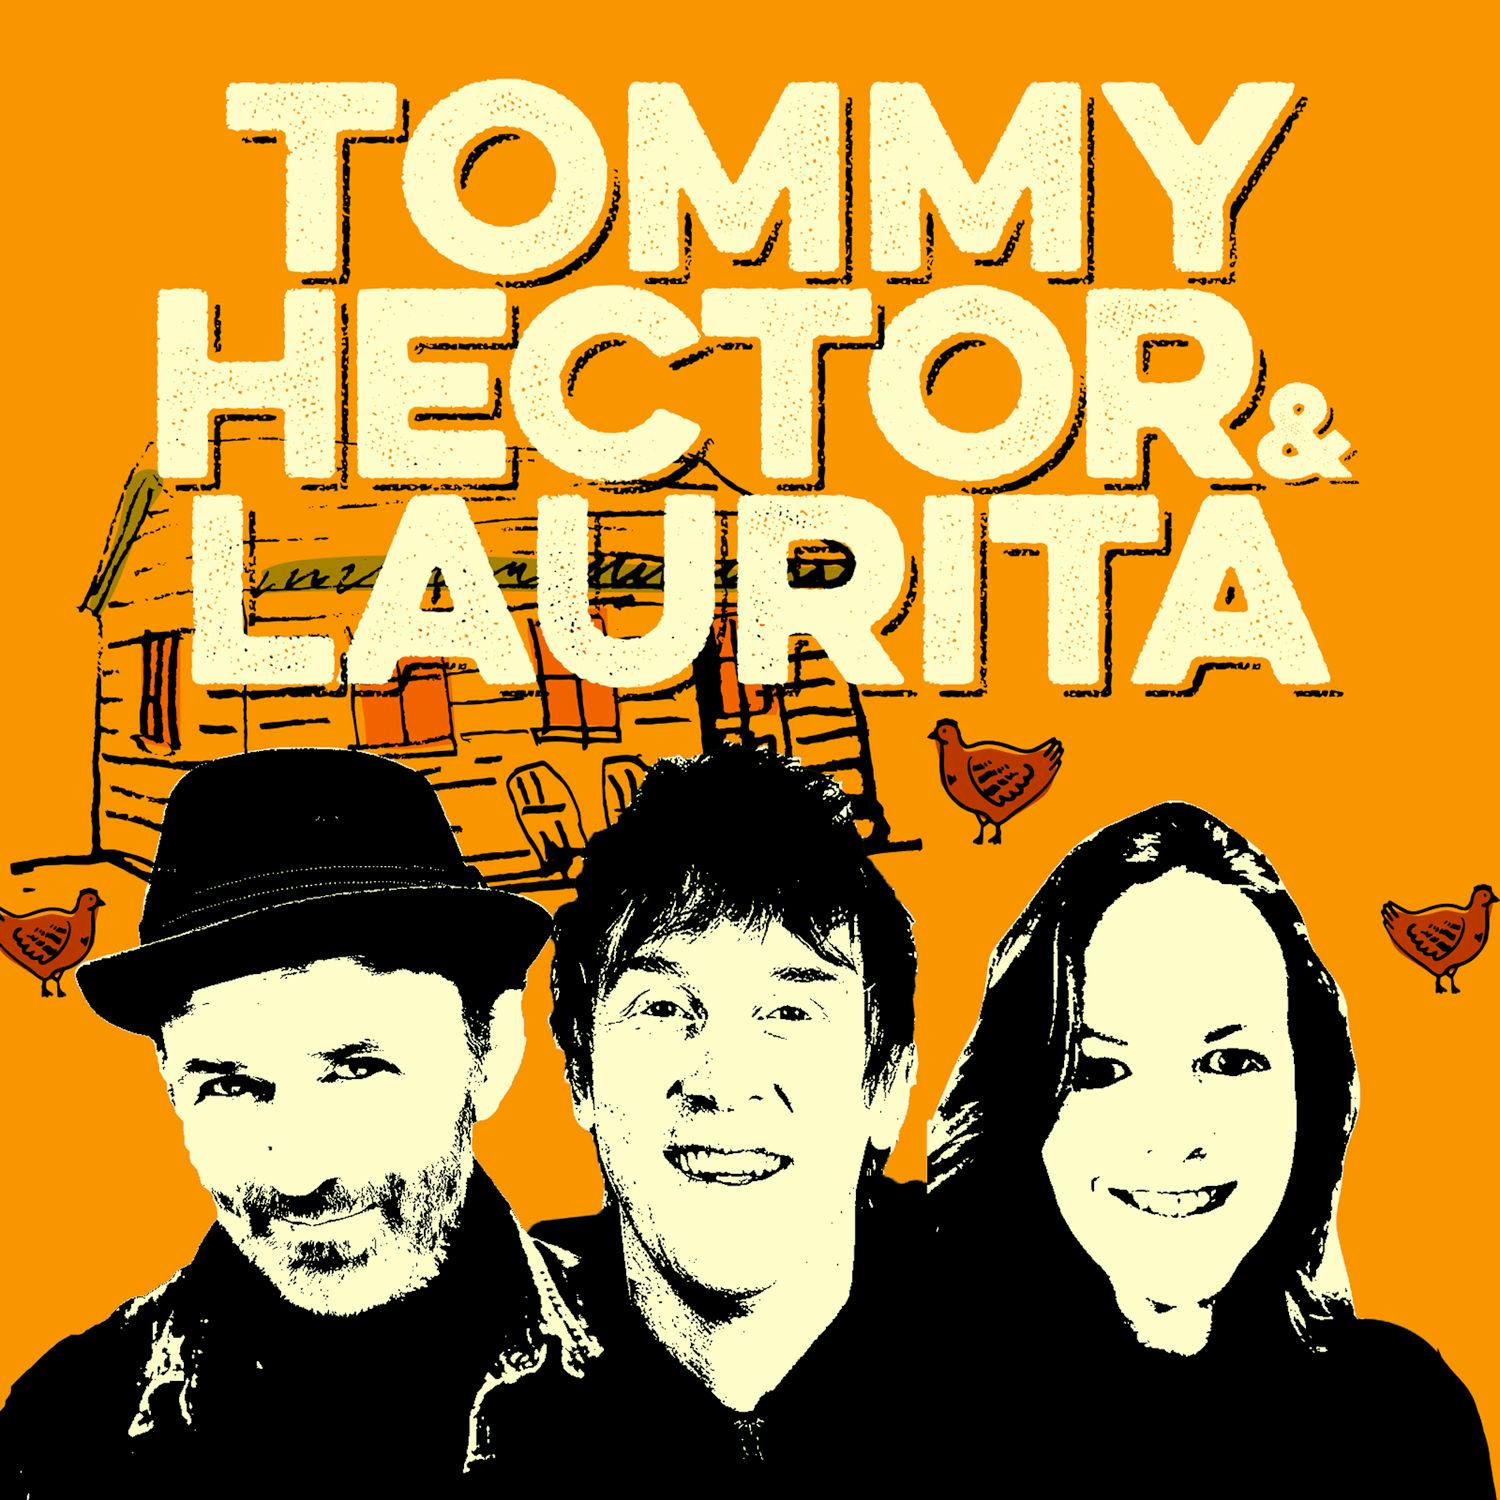 The Tommy, Hector & Laurita Podcast